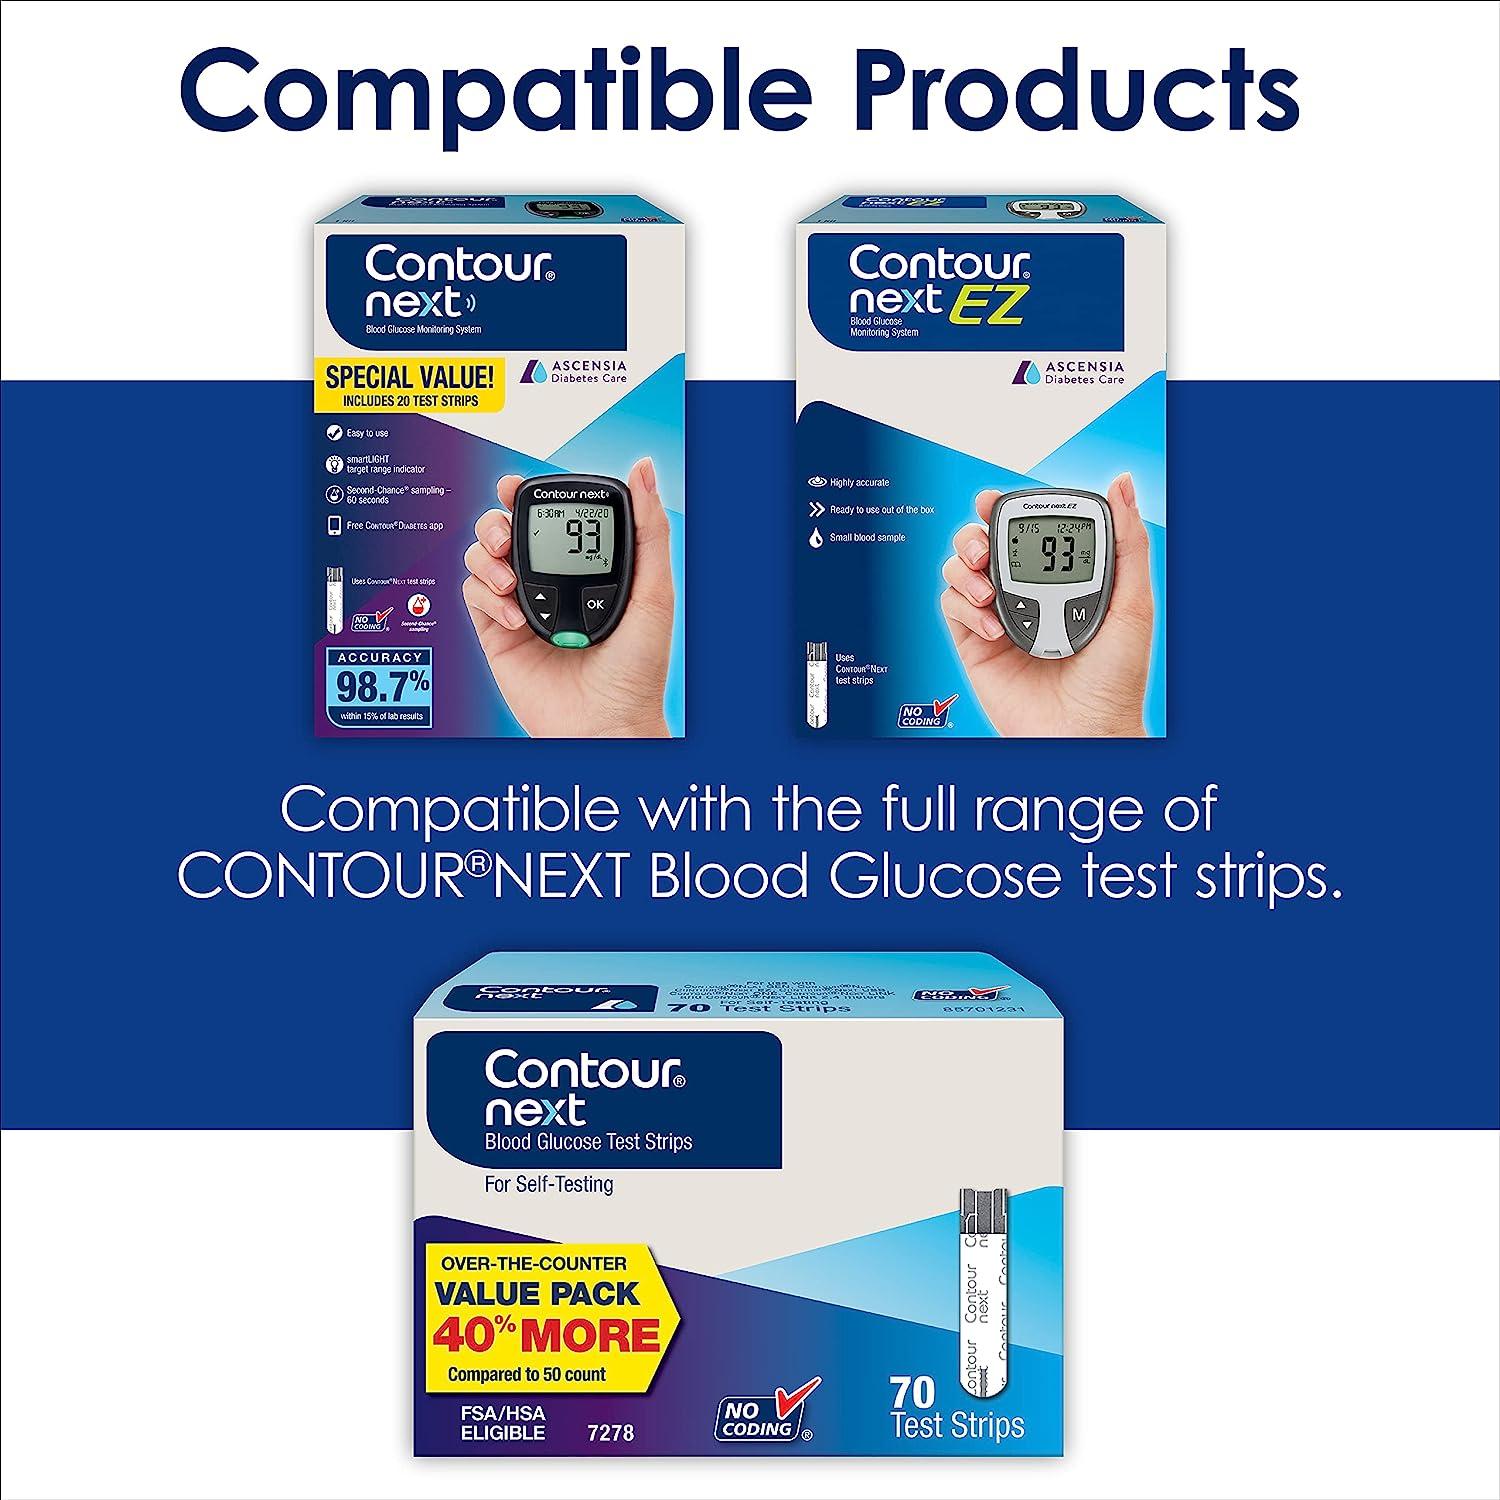 The Contour Next Blood Glucose Monitoring System All-in-One Kit for Diabetes